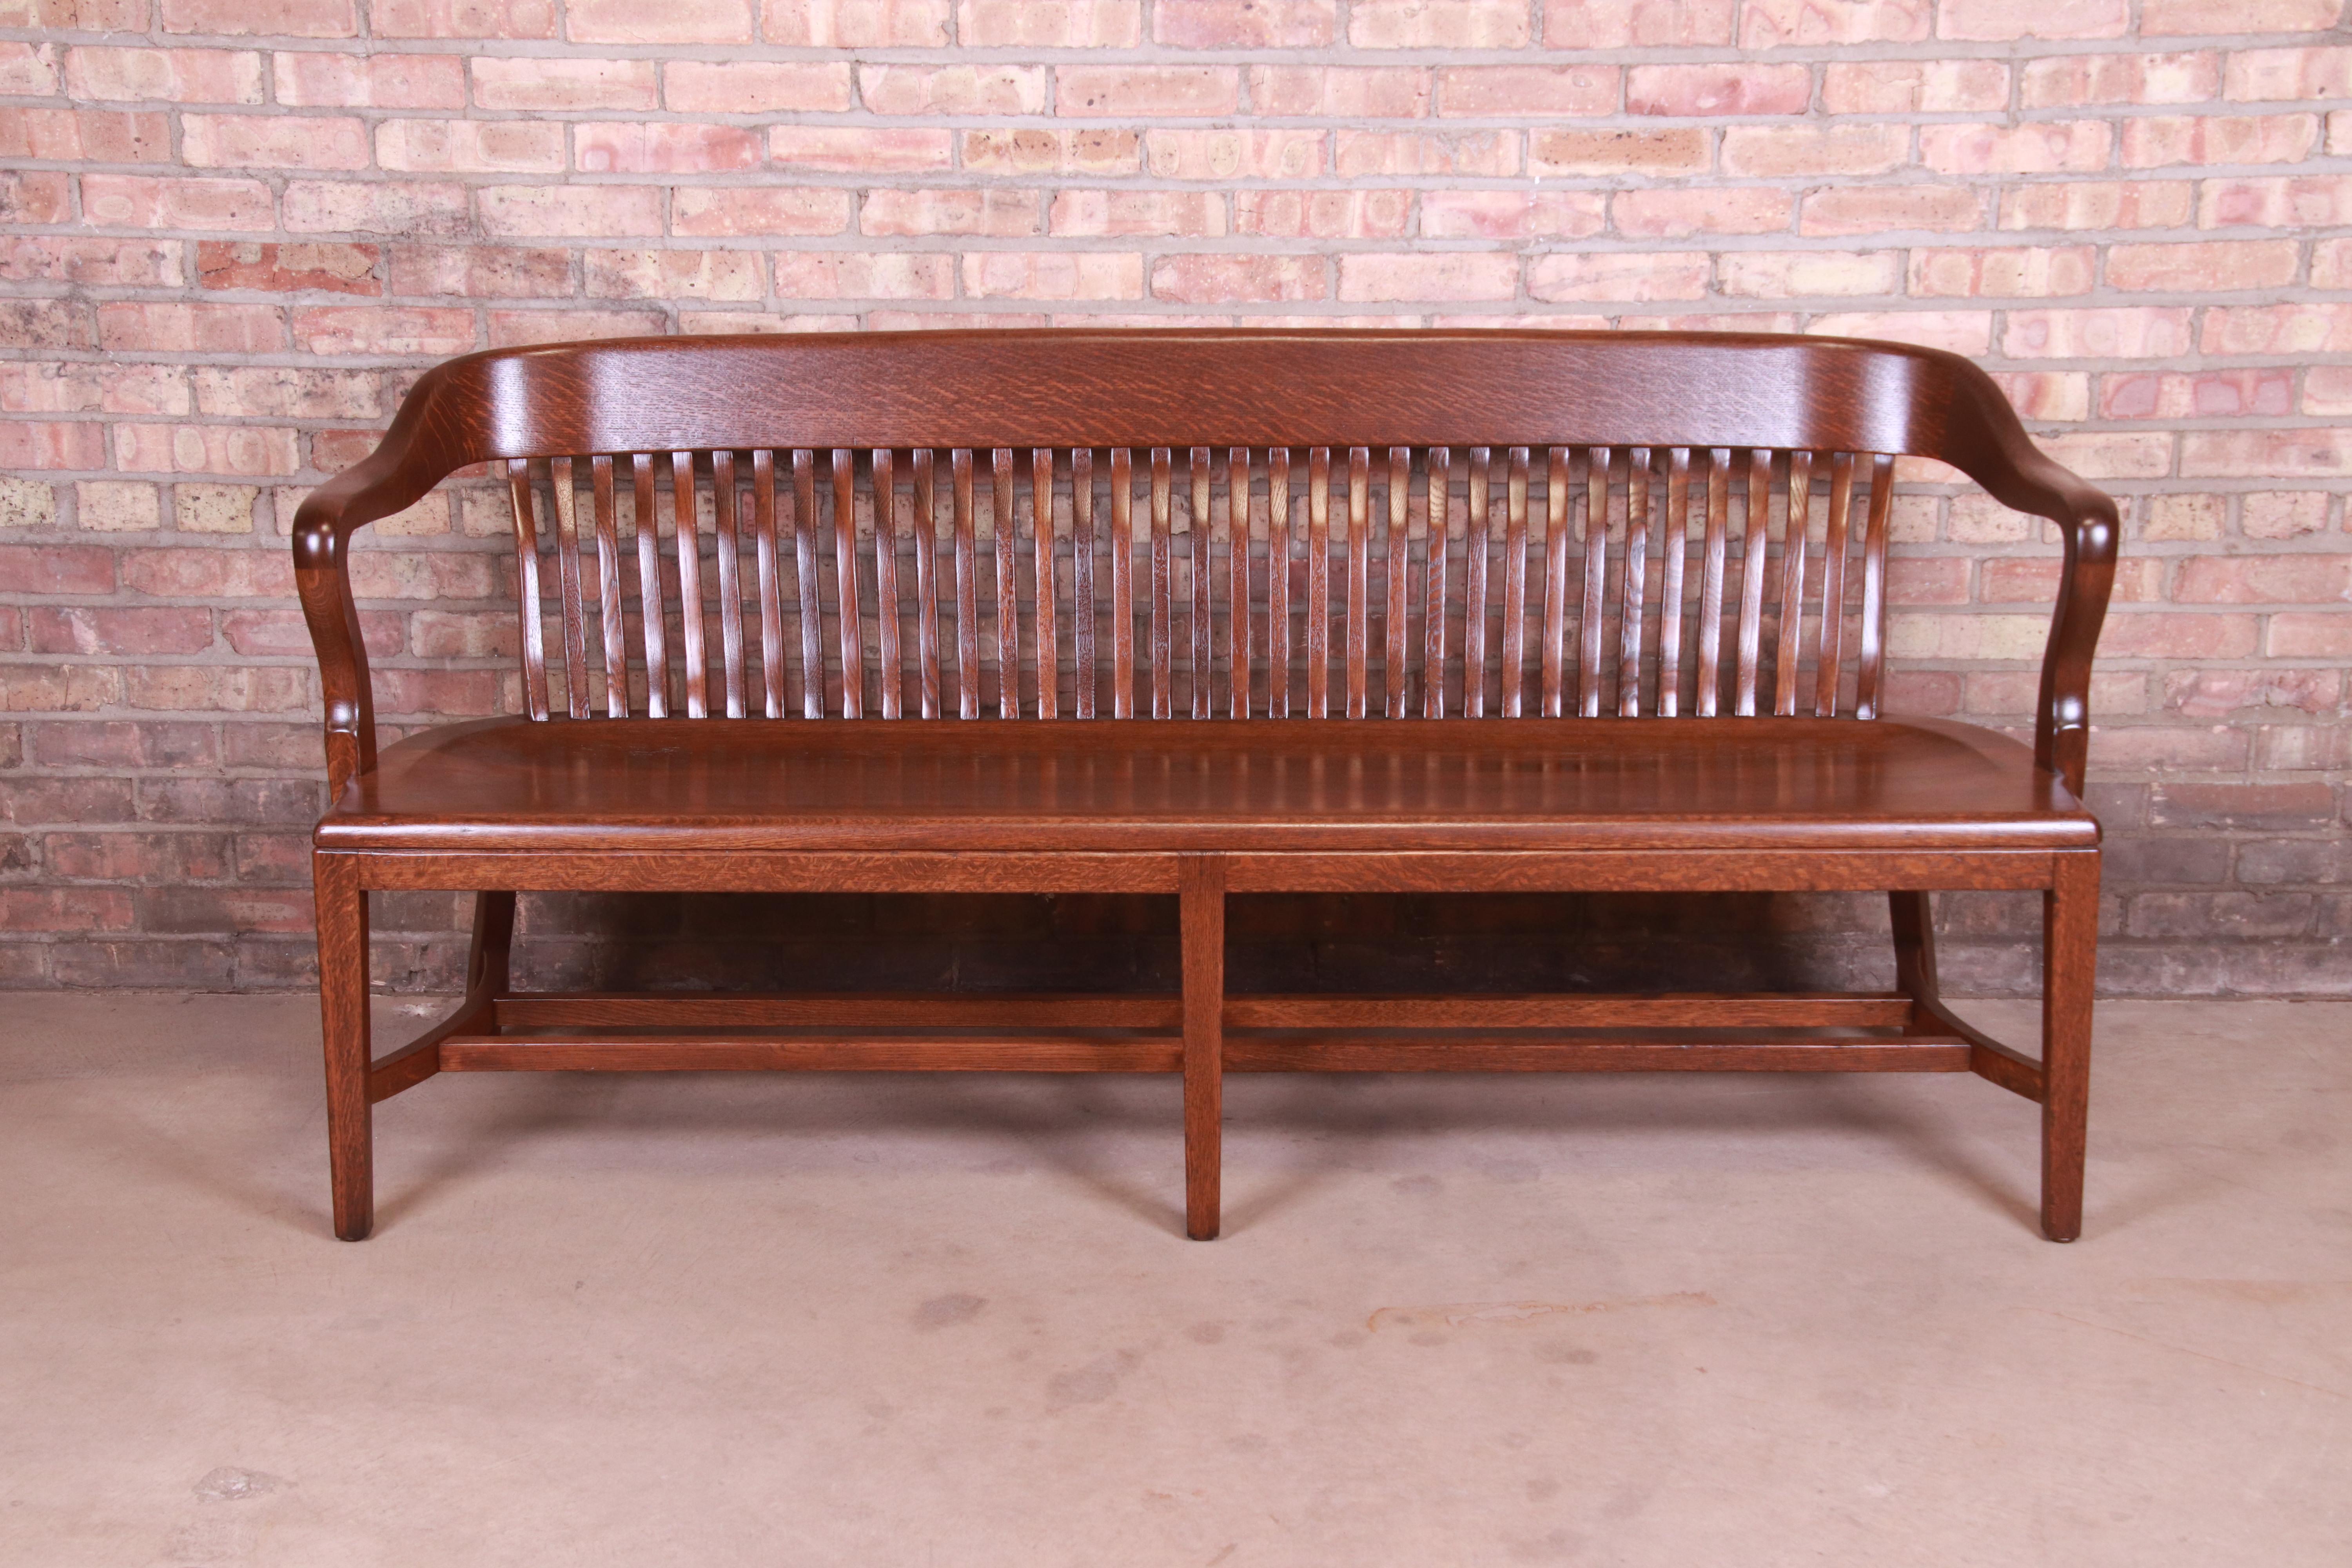 An exceptional solid oak banker or lawyer bench

By B.L. Marble Chair Co.

USA, Early 20th Century

Measures: 72